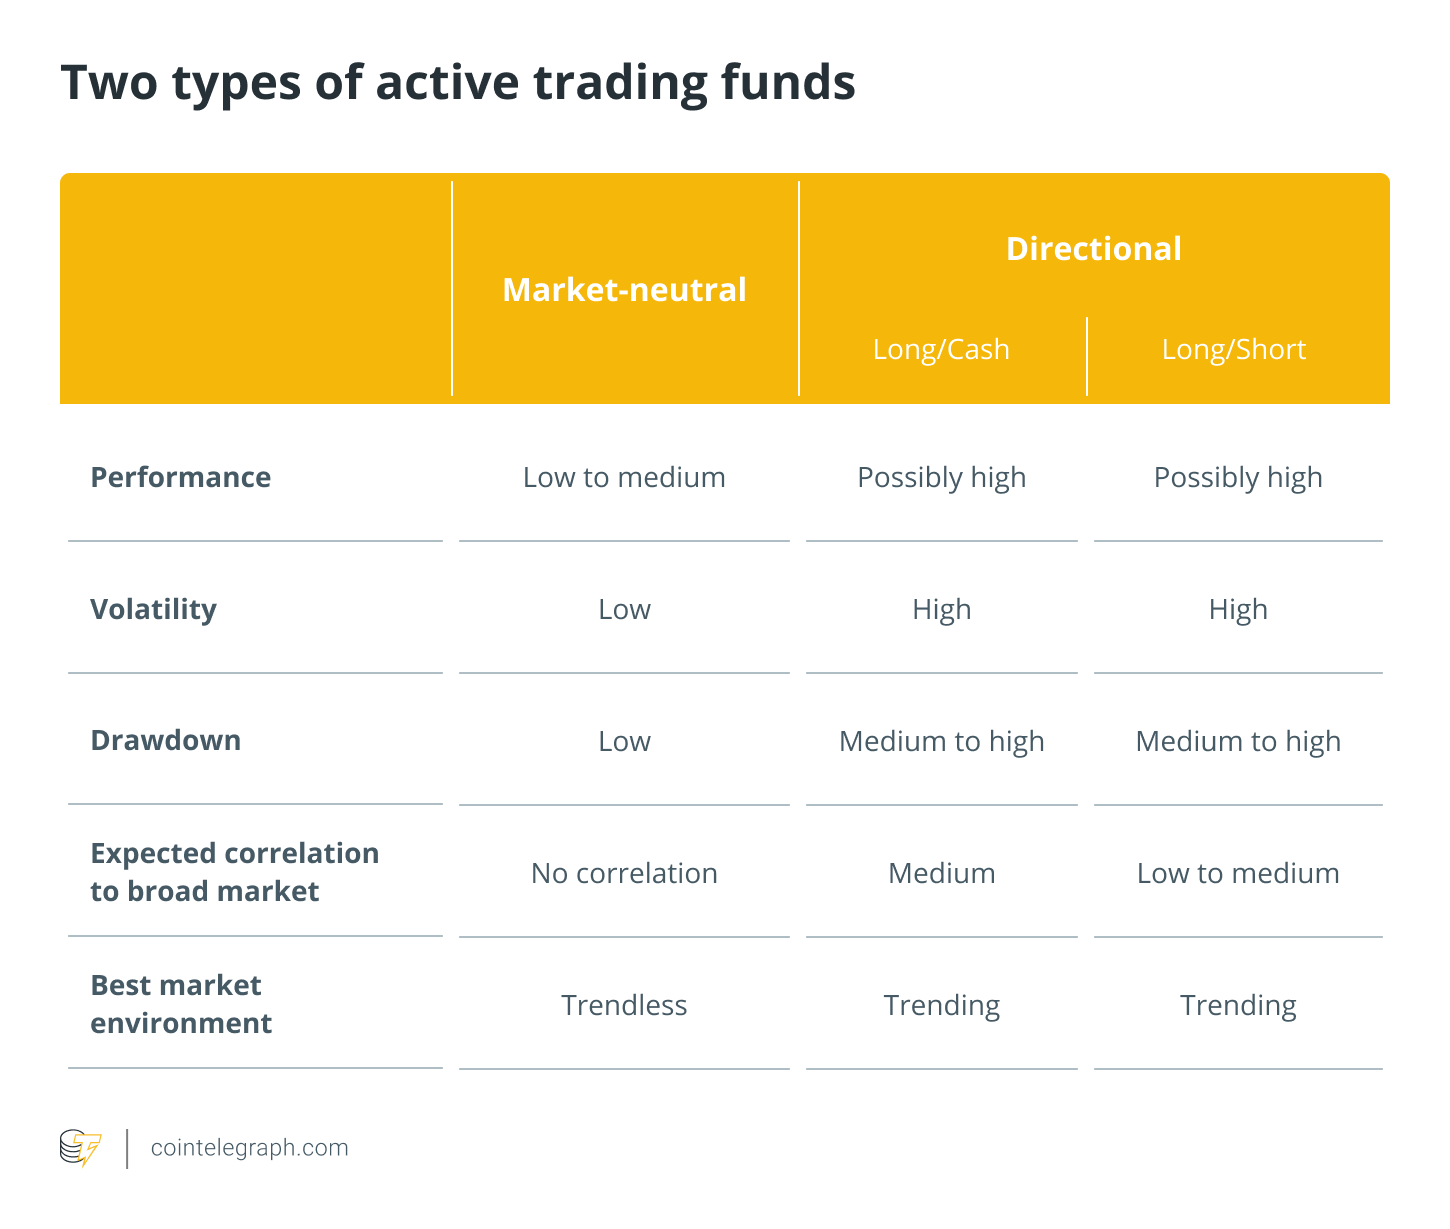 Two types of active trading funds